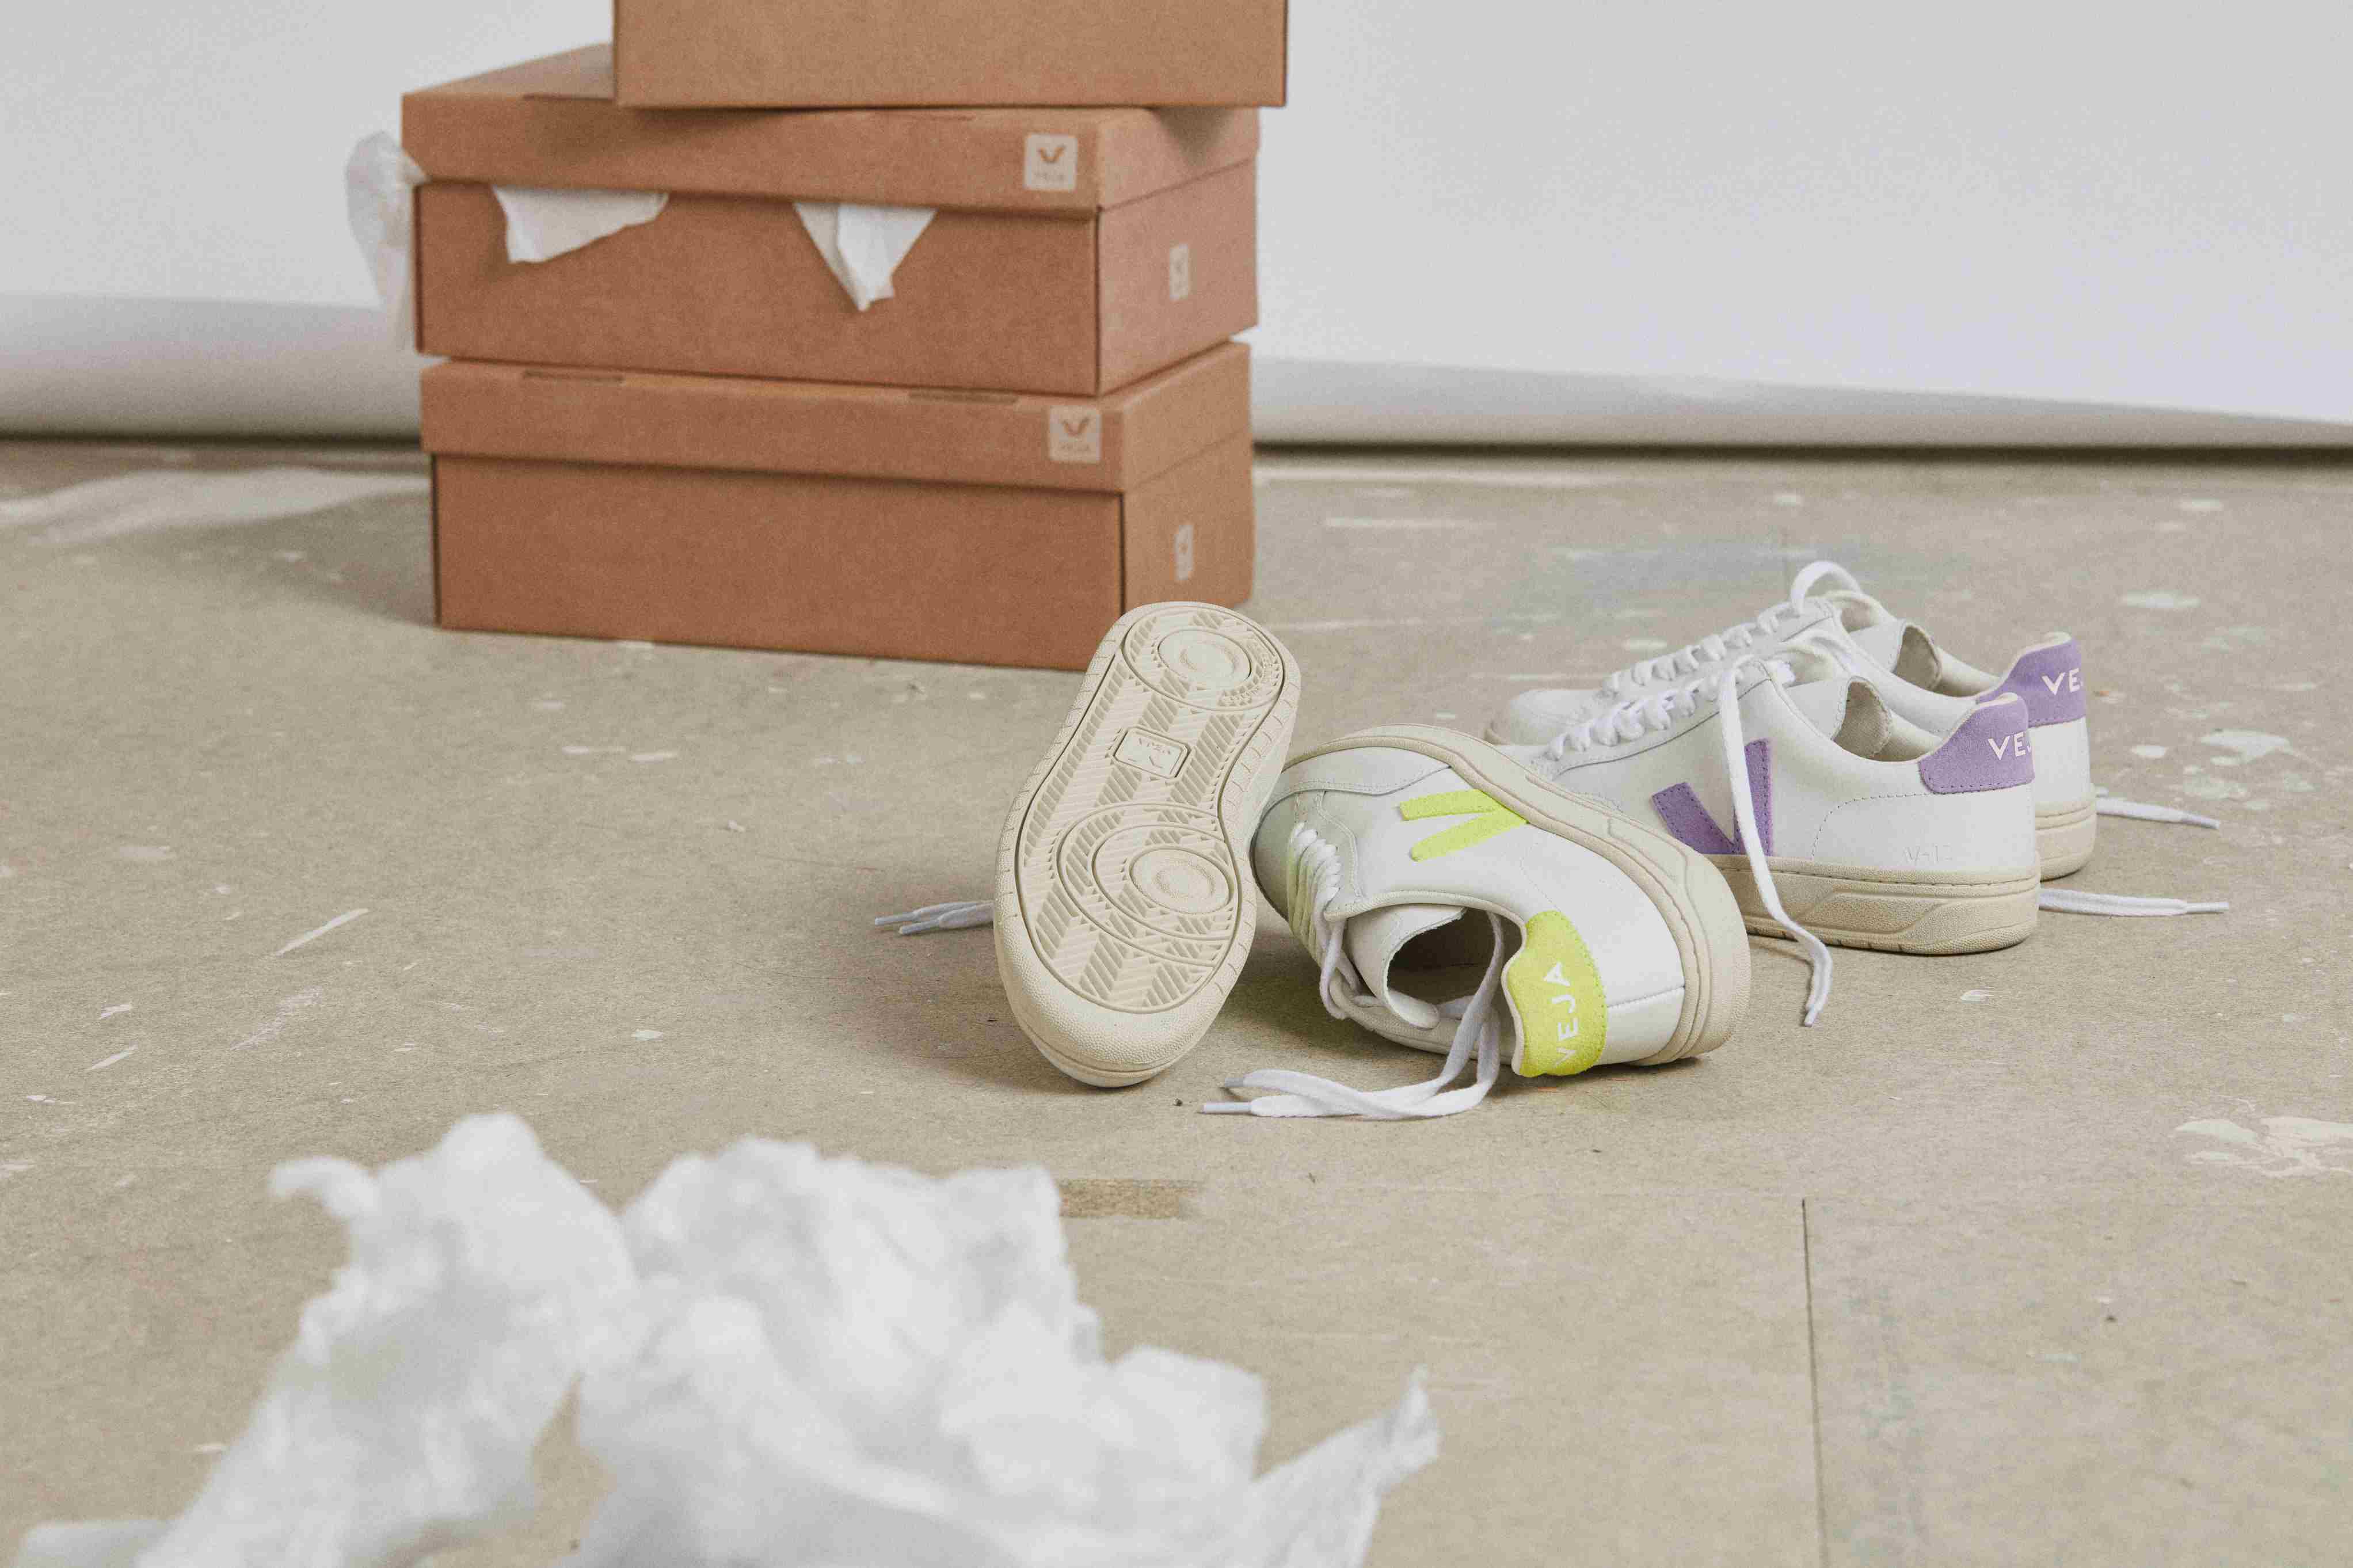 Veja trainers 